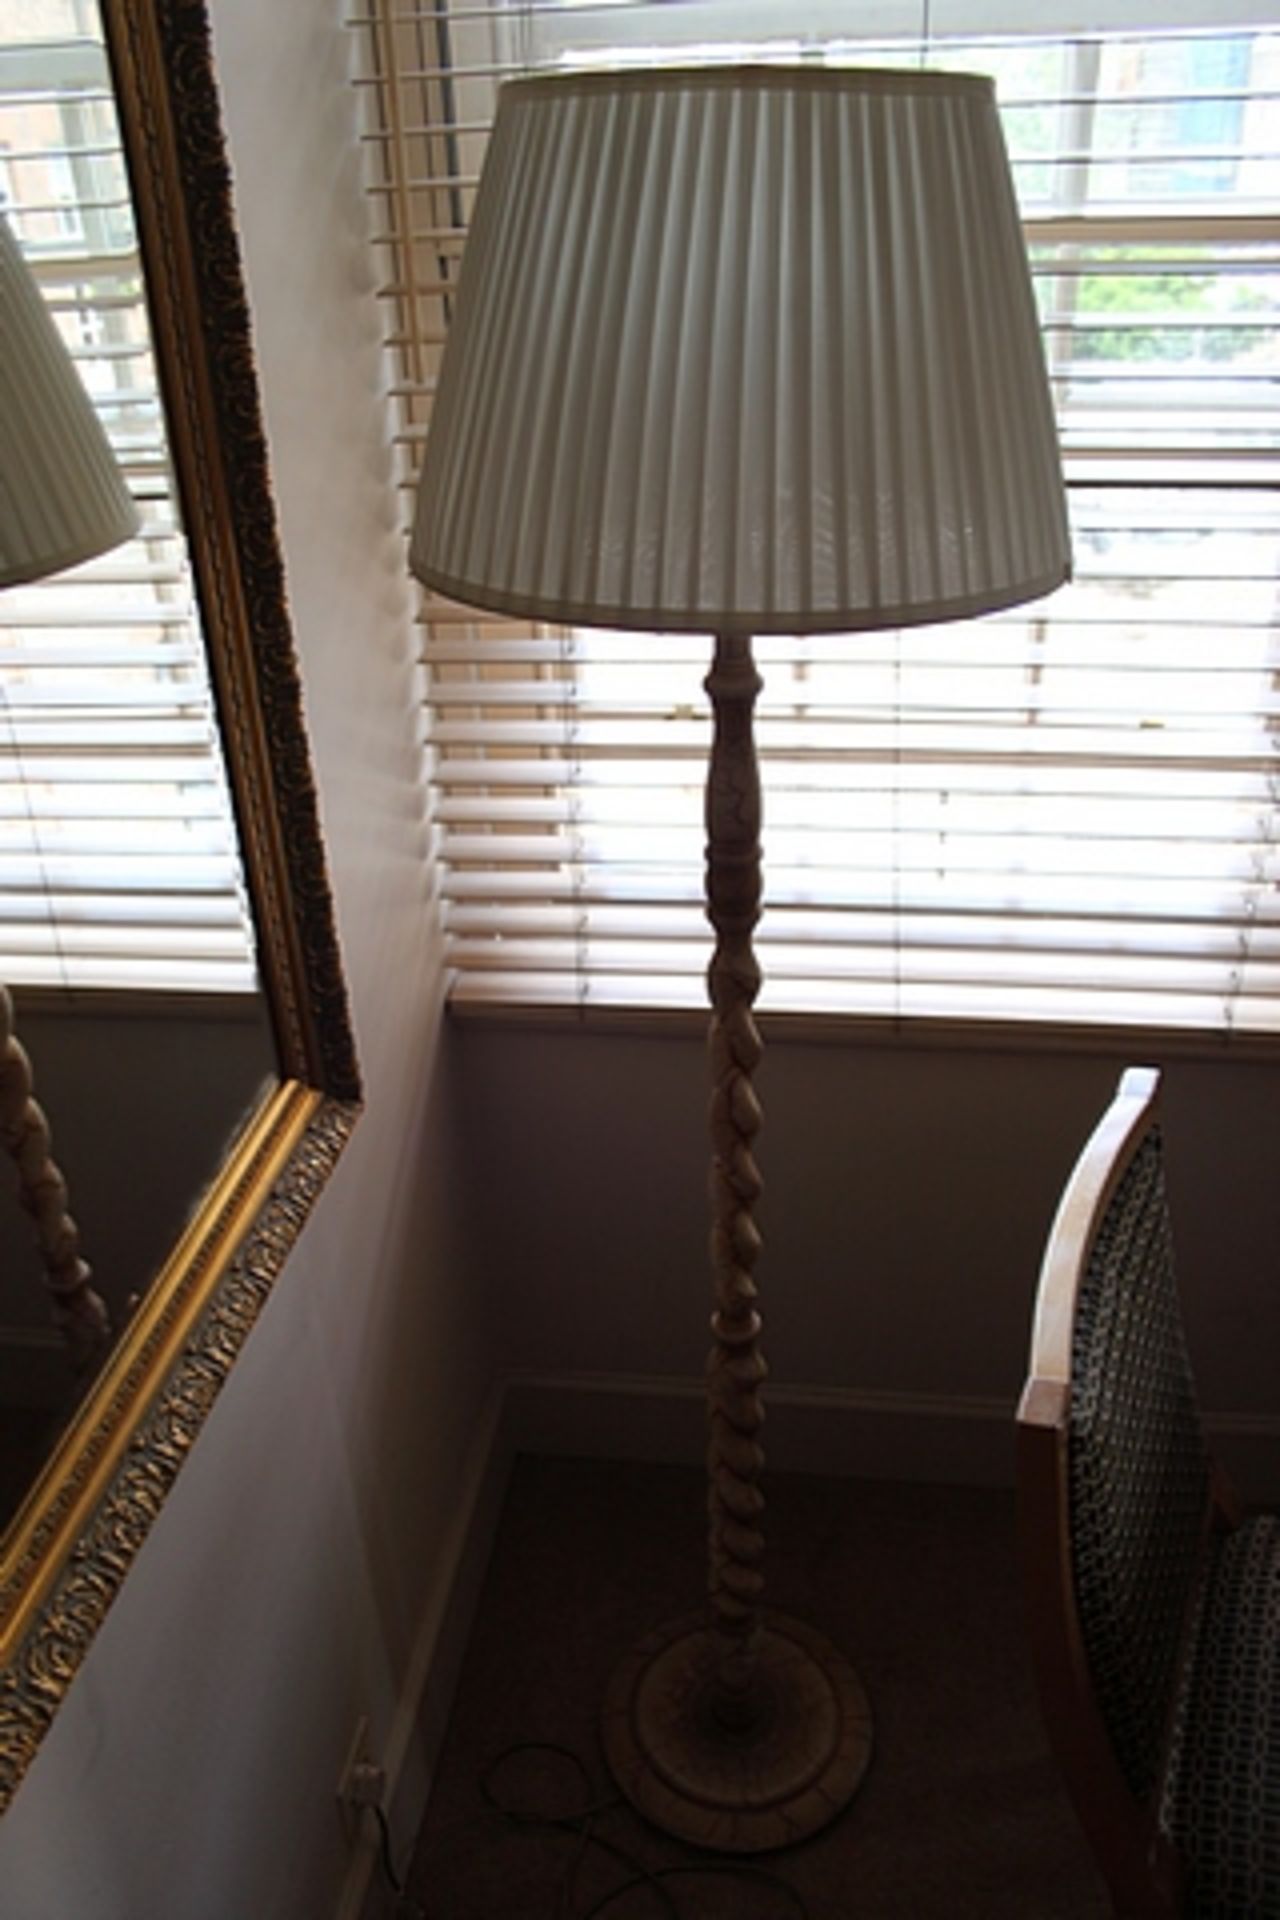 Barley twist floor lamp with linen shade features a carved coil of wood from base to shade topped